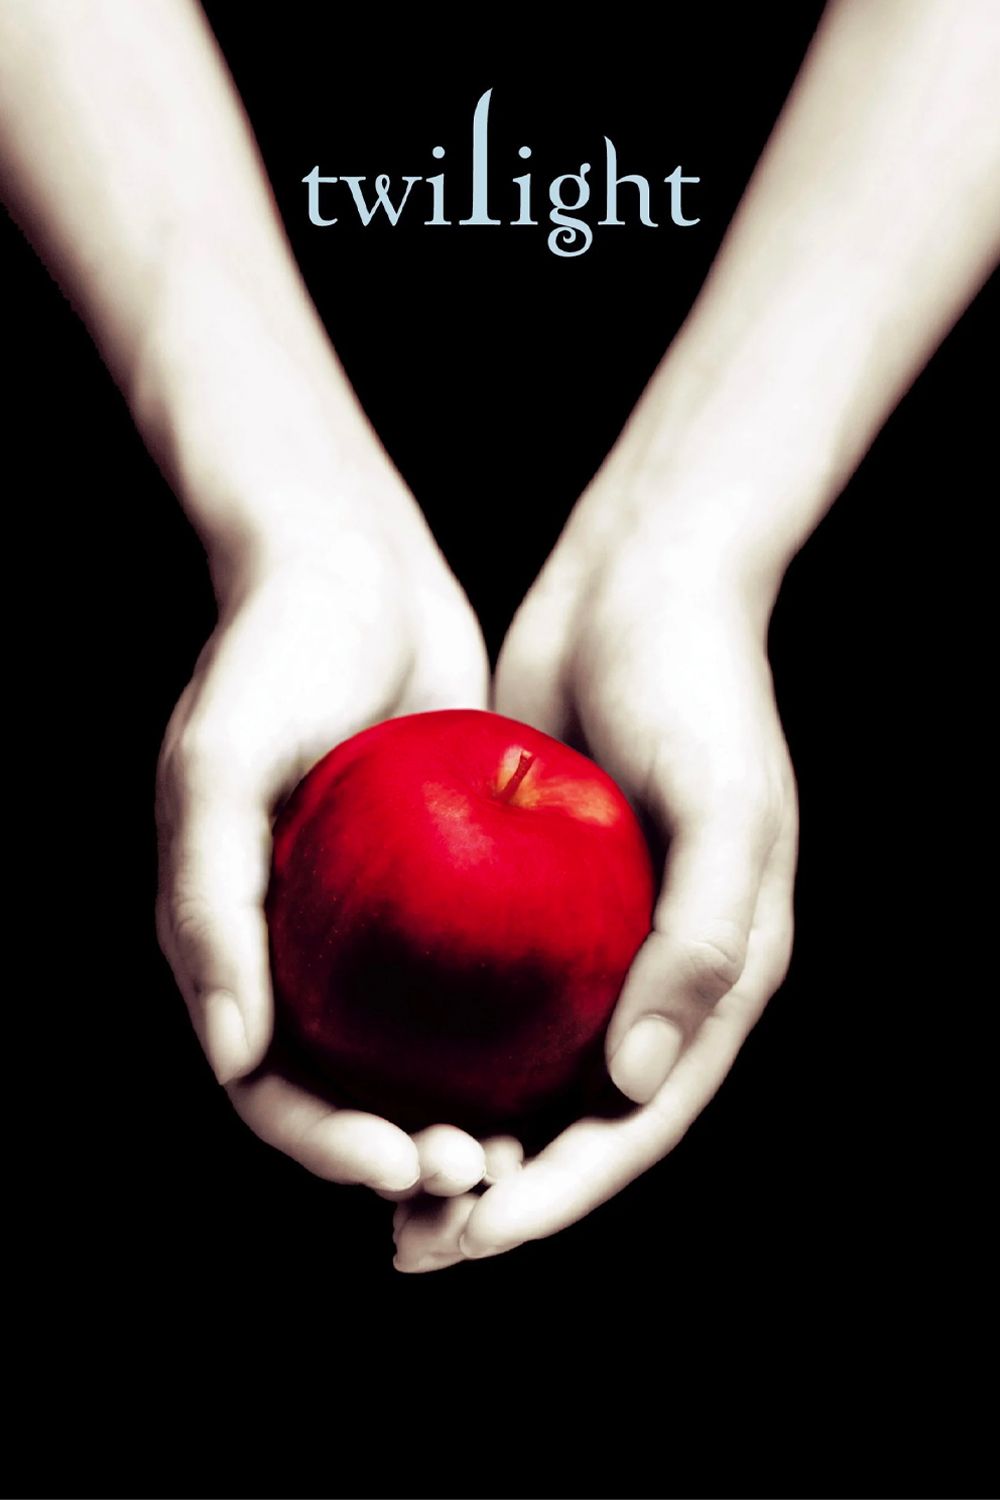 Twilight Book Cover Showing White Arms Holding a Red Apple